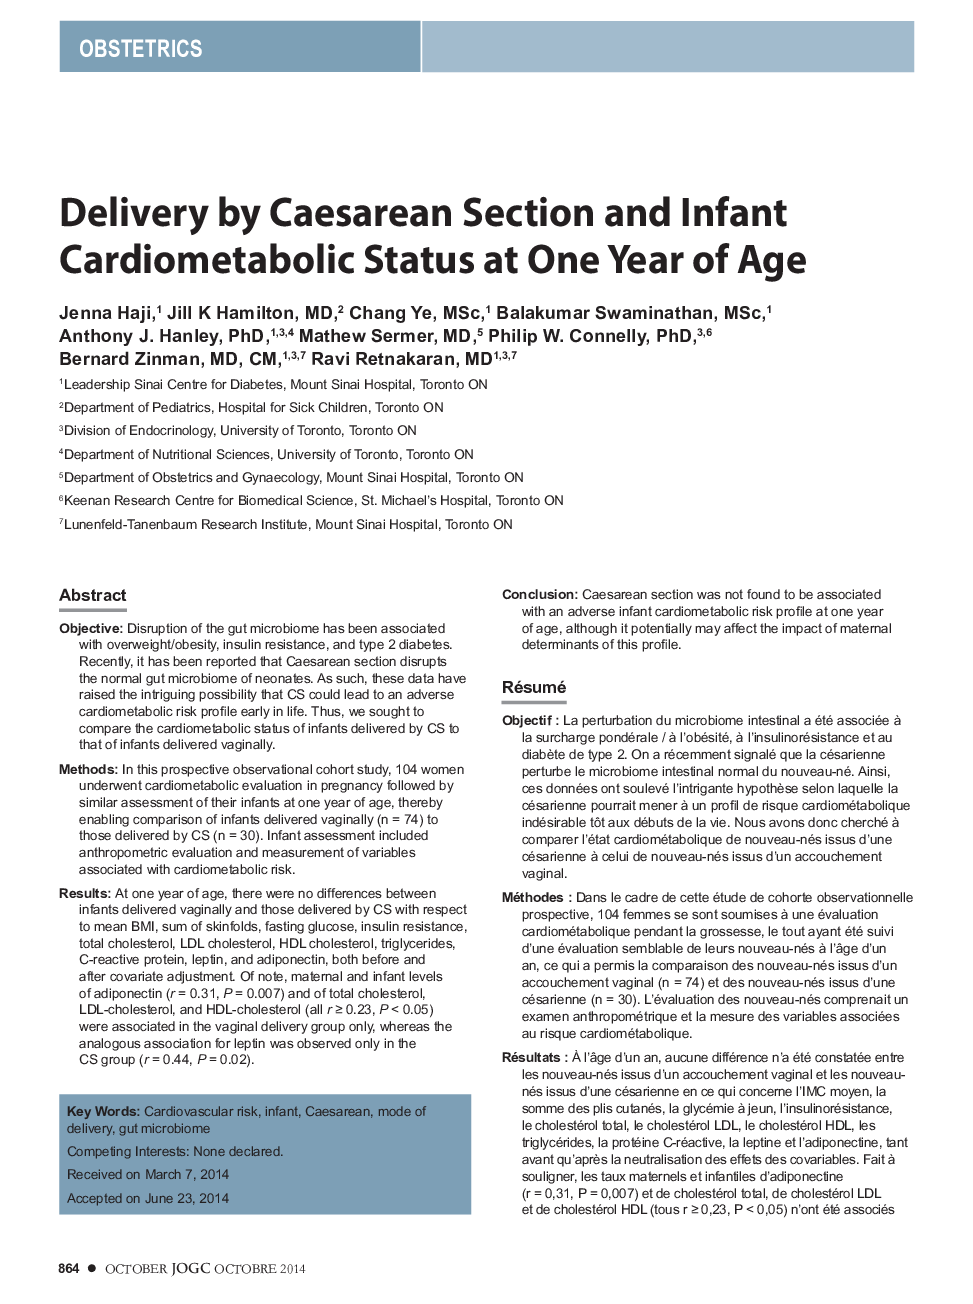 Delivery by Caesarean Section and Infant Cardiometabolic Status at One Year of Age